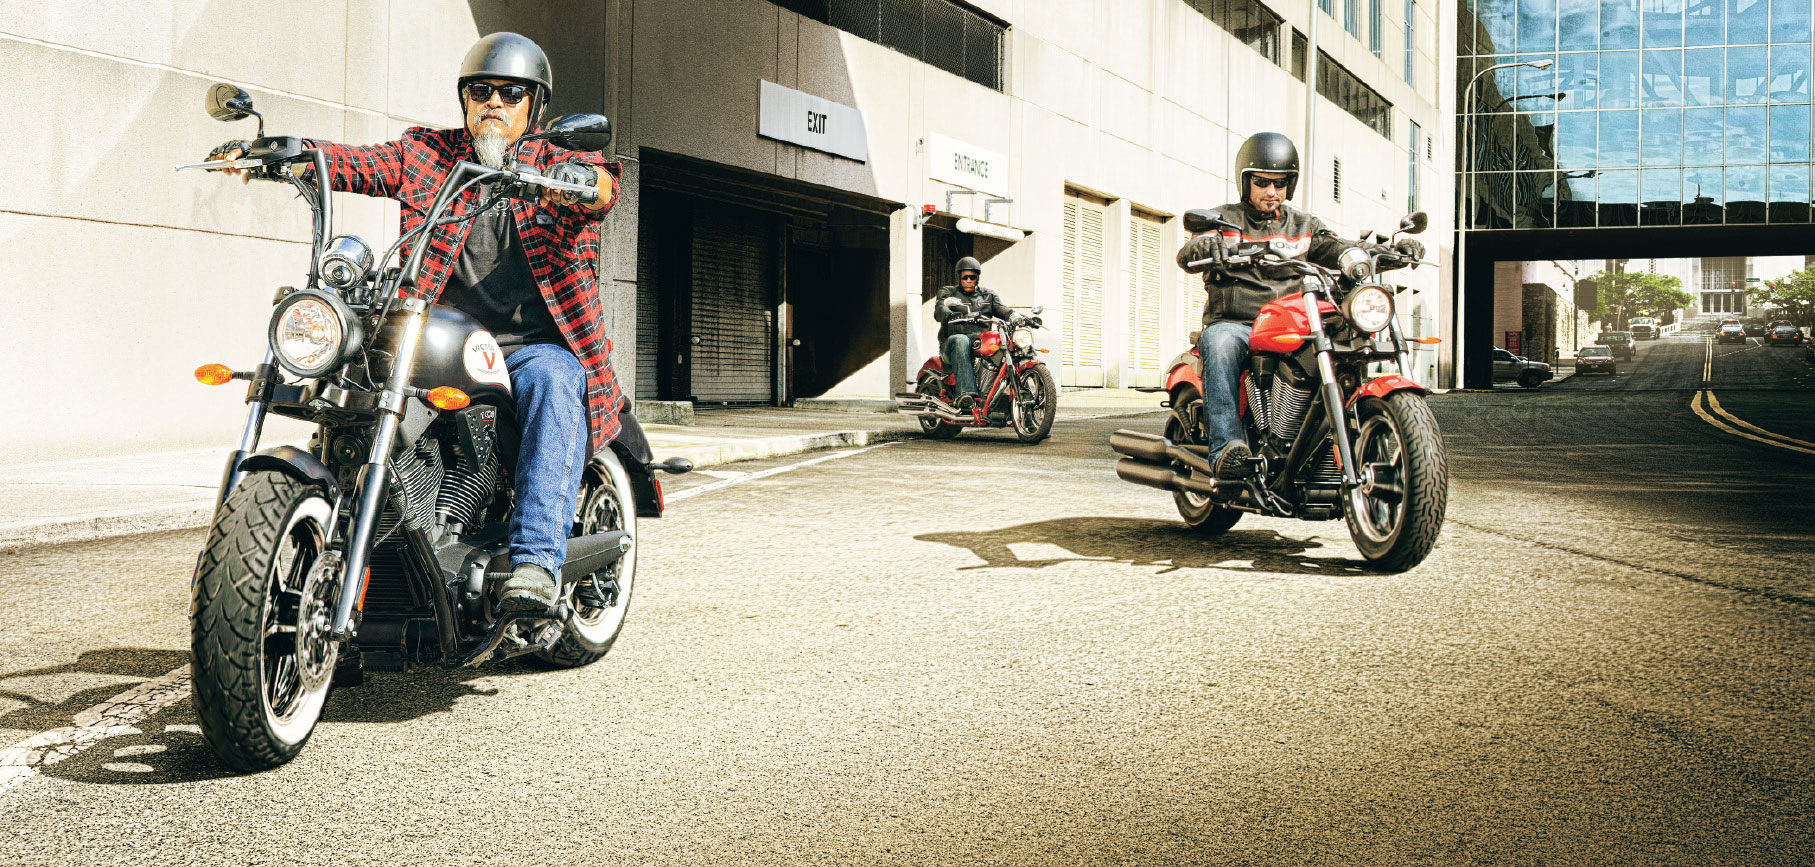 2014 Victory High-Ball Cruiser Motorcycle Review